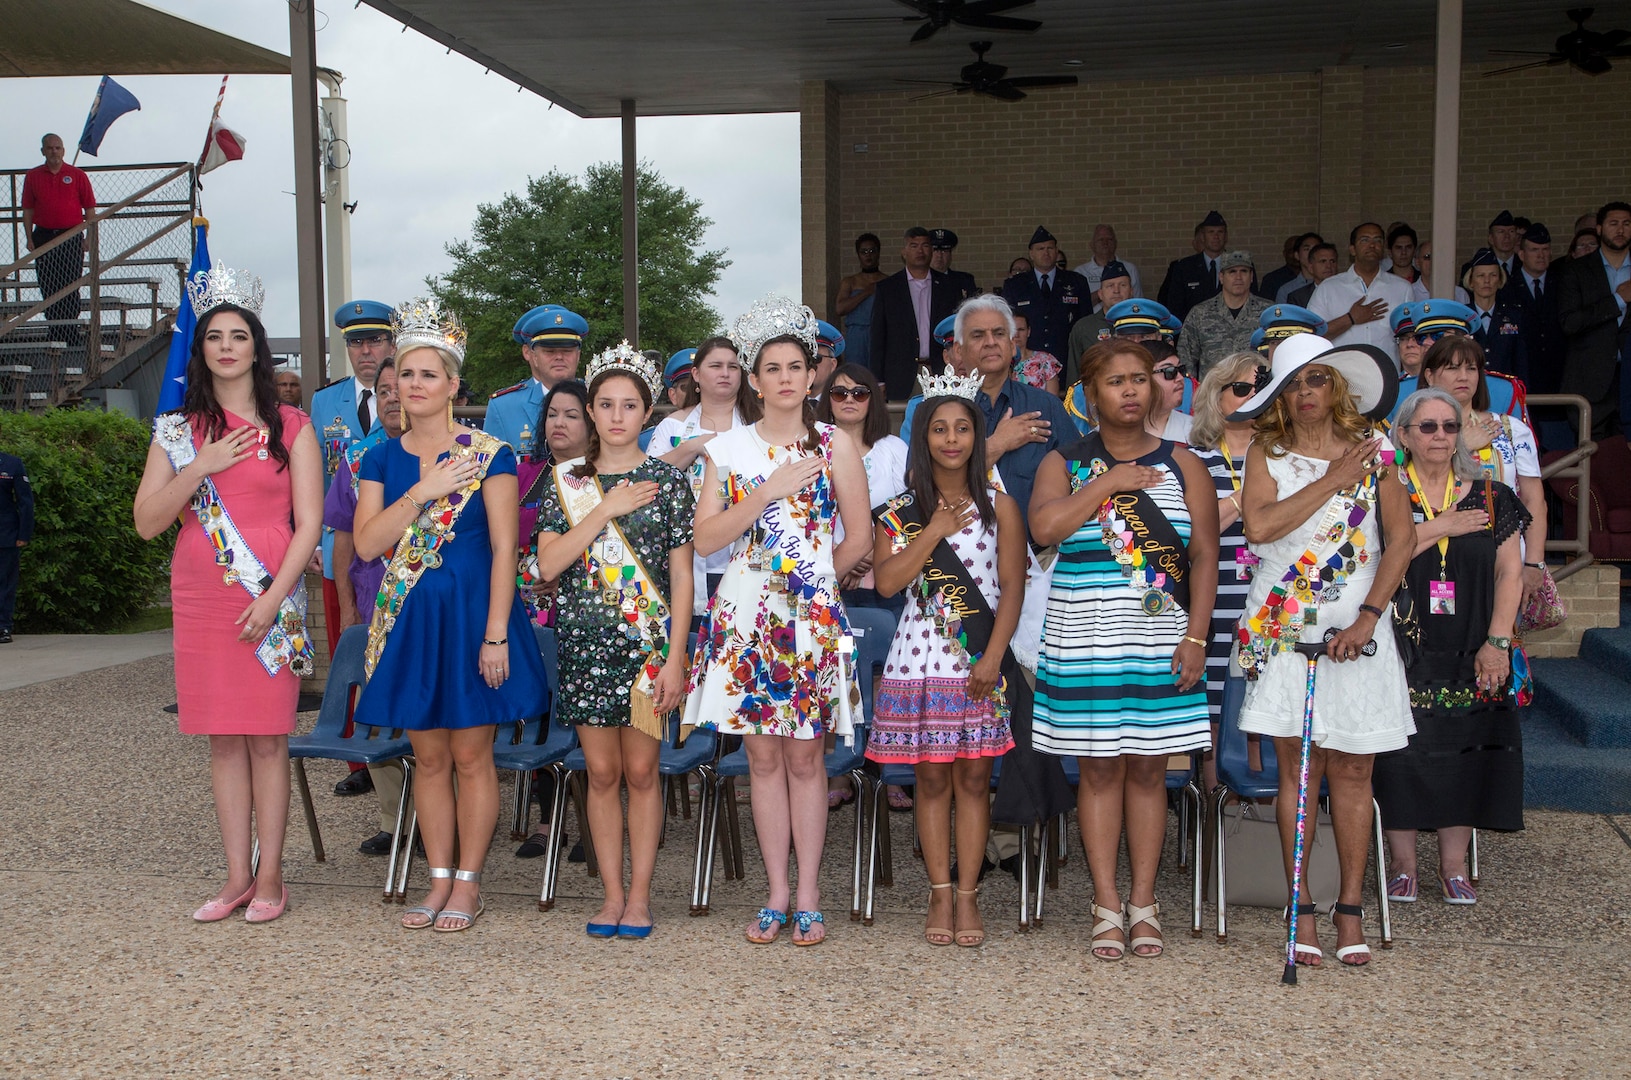 The members of the 2017 Fiesta Court stand during the playing of the Star Spangled Banner at the 2017 Air Force Basic Training Fiesta Graduation Parade April. 21, 2017, at JBSA-Lackland. The ladies attended the graduation as part of an annual tradition of Fiesta San Antonio, a 10-day celebration of military history to honor the life and memory of the members who died in the Battle of the Alamo and the Battle of San Jacinto. Beginning in 1891 as a one-day parade event, Fiesta San Antonio has evolved into a 10-day festival celebrating the heritage and history of San Antonio and the vast military community. (U.S. Air Force photo by Johnny Saldivar)